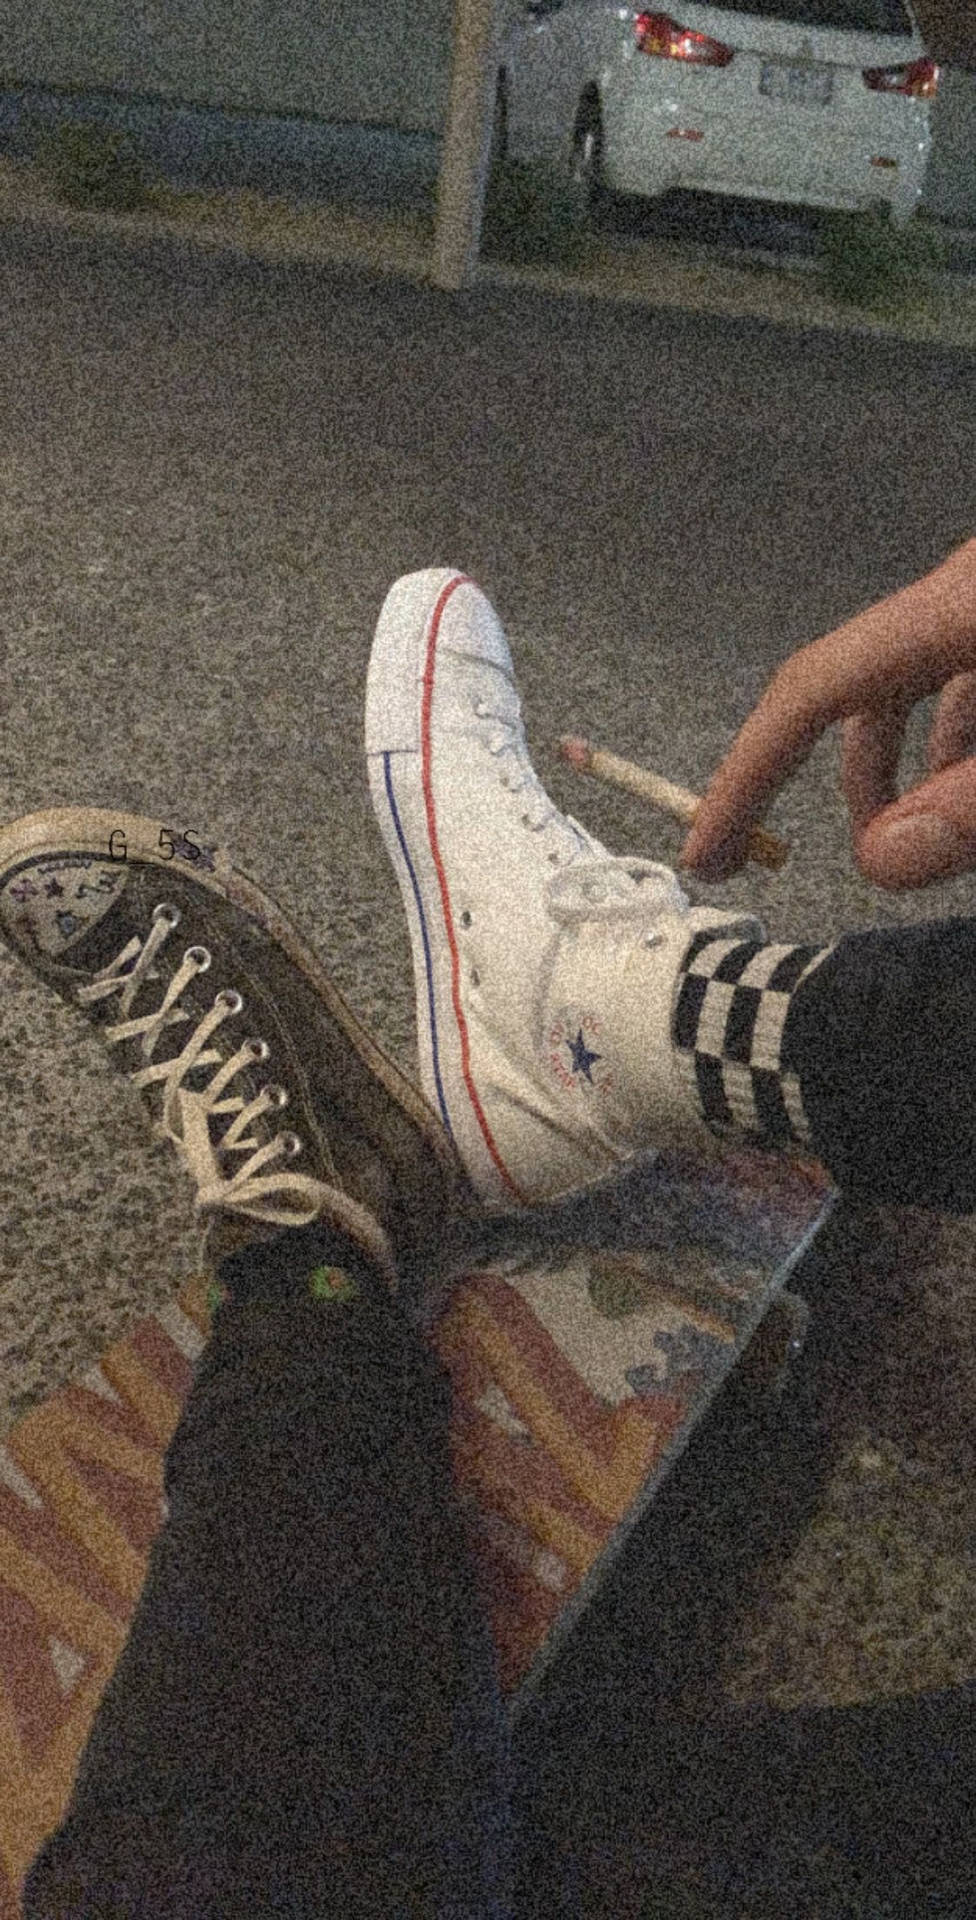 Mismatched Converse Shoes Grunge Style Skater Aesthetic Wallpaper